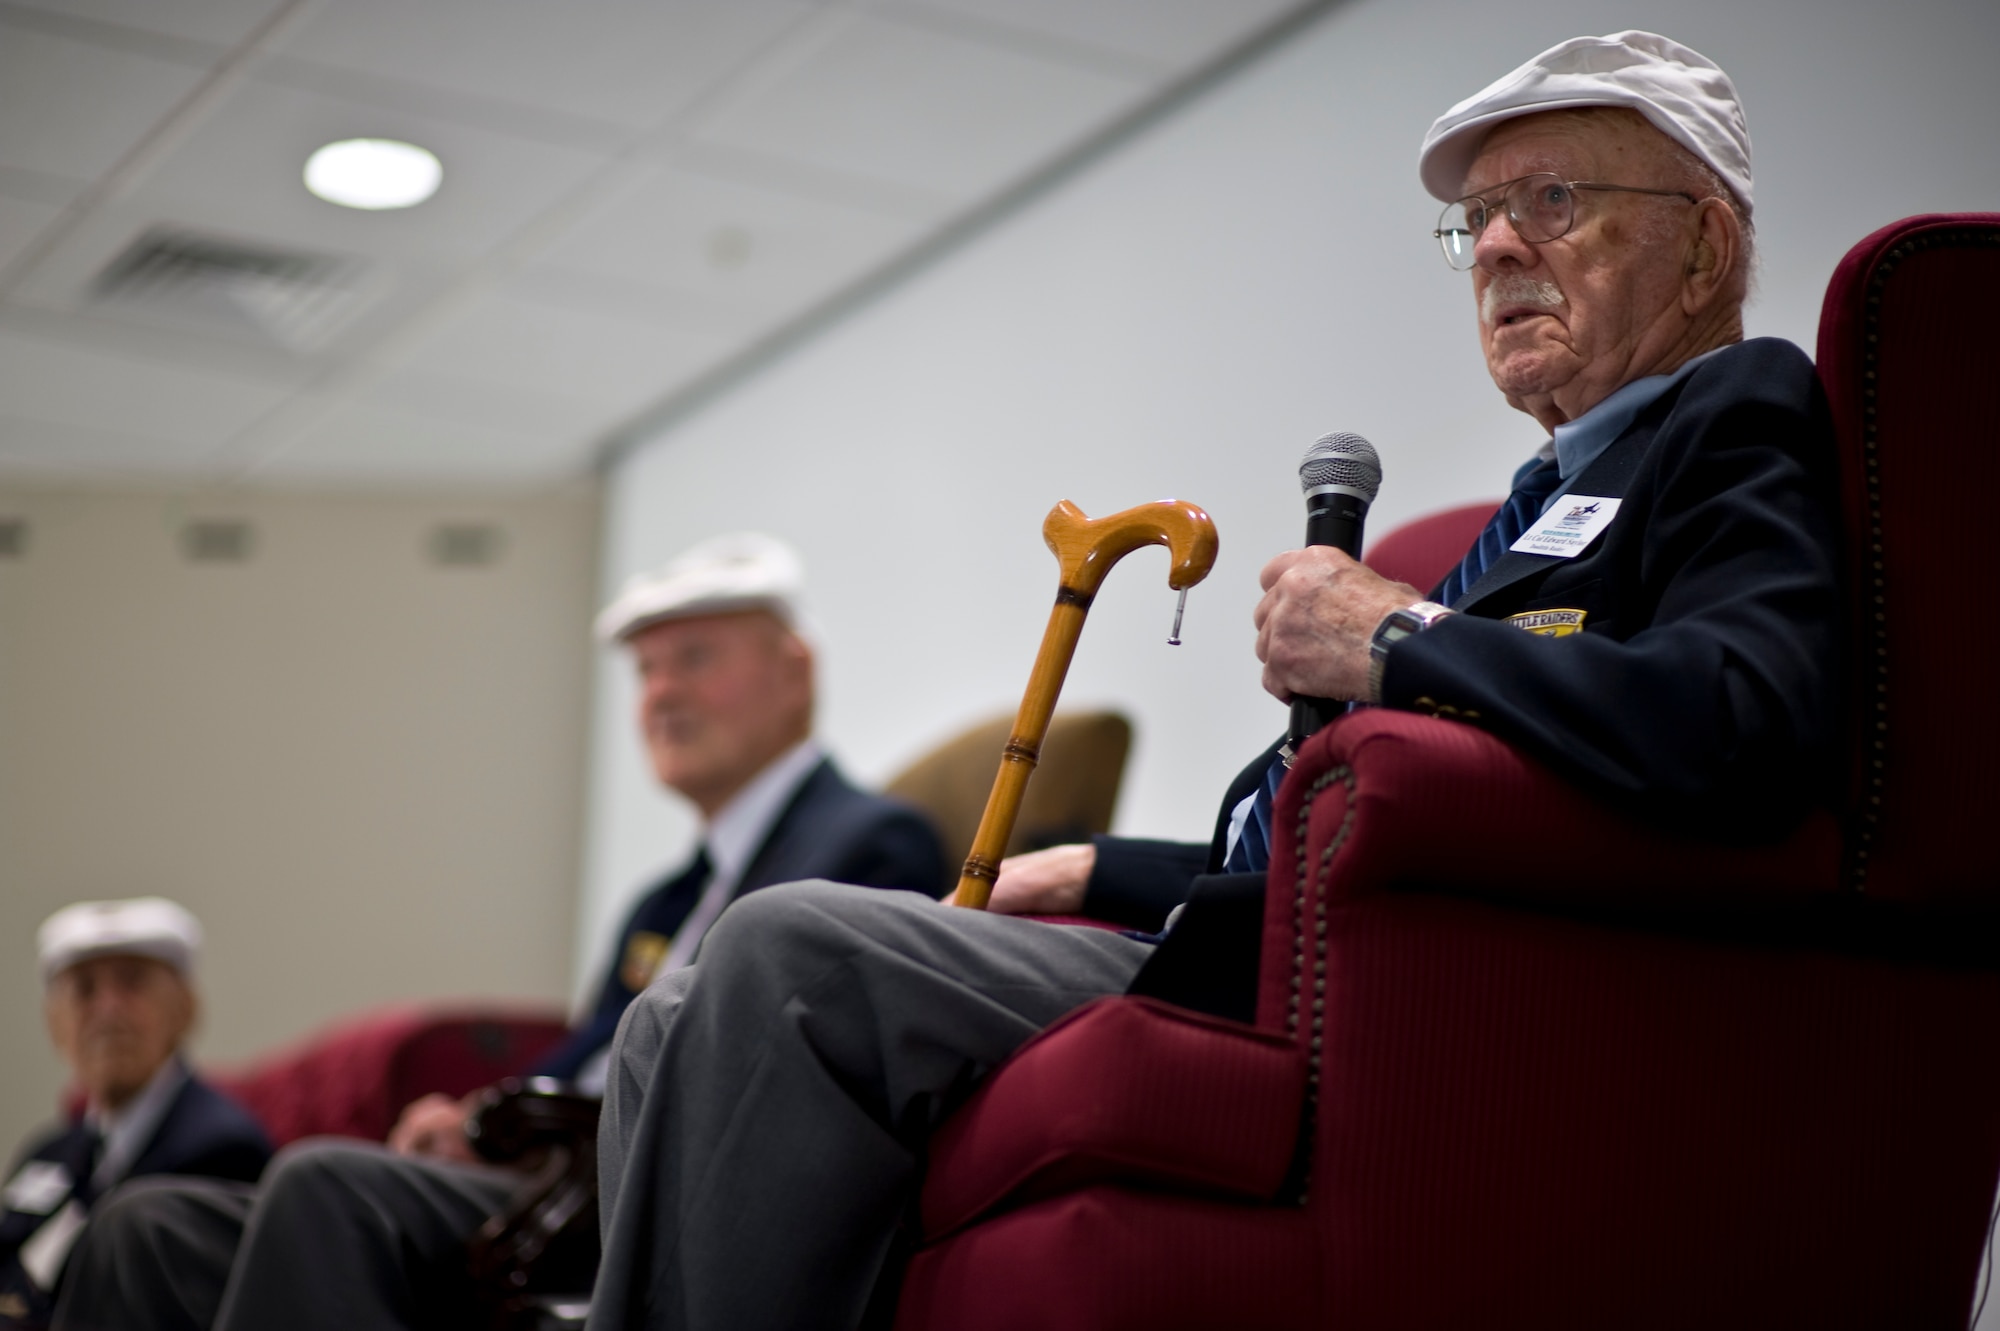 Retired U.S. Air Force Lt. Col. Edward Saylor, one of the Doolittle Raiders, left, makes a point about military service during a session at the 319th Special Operations Squadron auditorium at Hurlburt Field, Fla., April 18, 2013. Dozens of Hurlburt Airmen gathered at the auditorium to listen to Saylor and his fellow Doolittle Raiders on the 71st anniversary of their mission. (U.S. Air Force Photo/Airman 1st Class Hayden K. Hyatt)